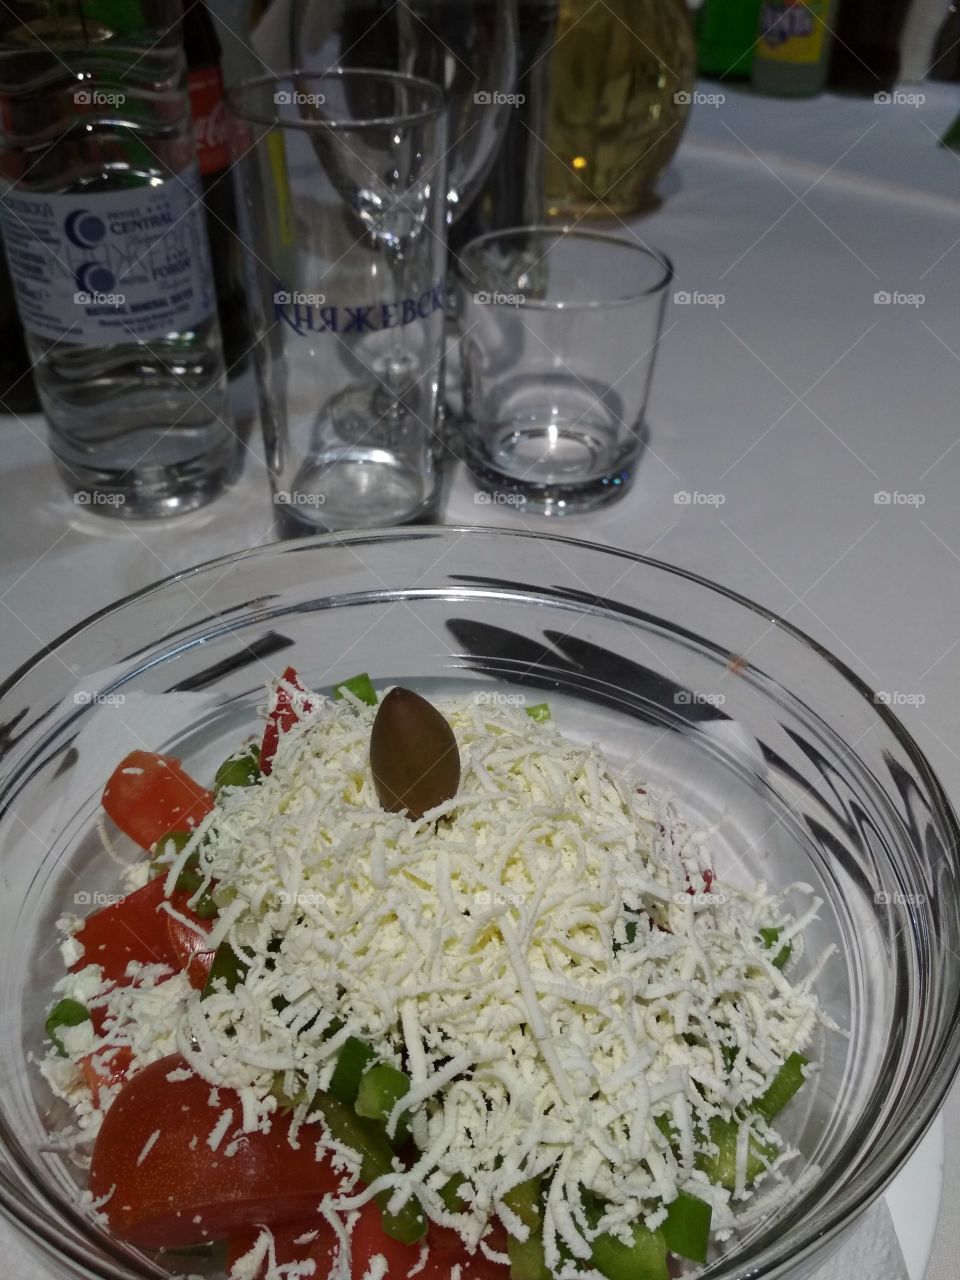 Salad and glasses for party